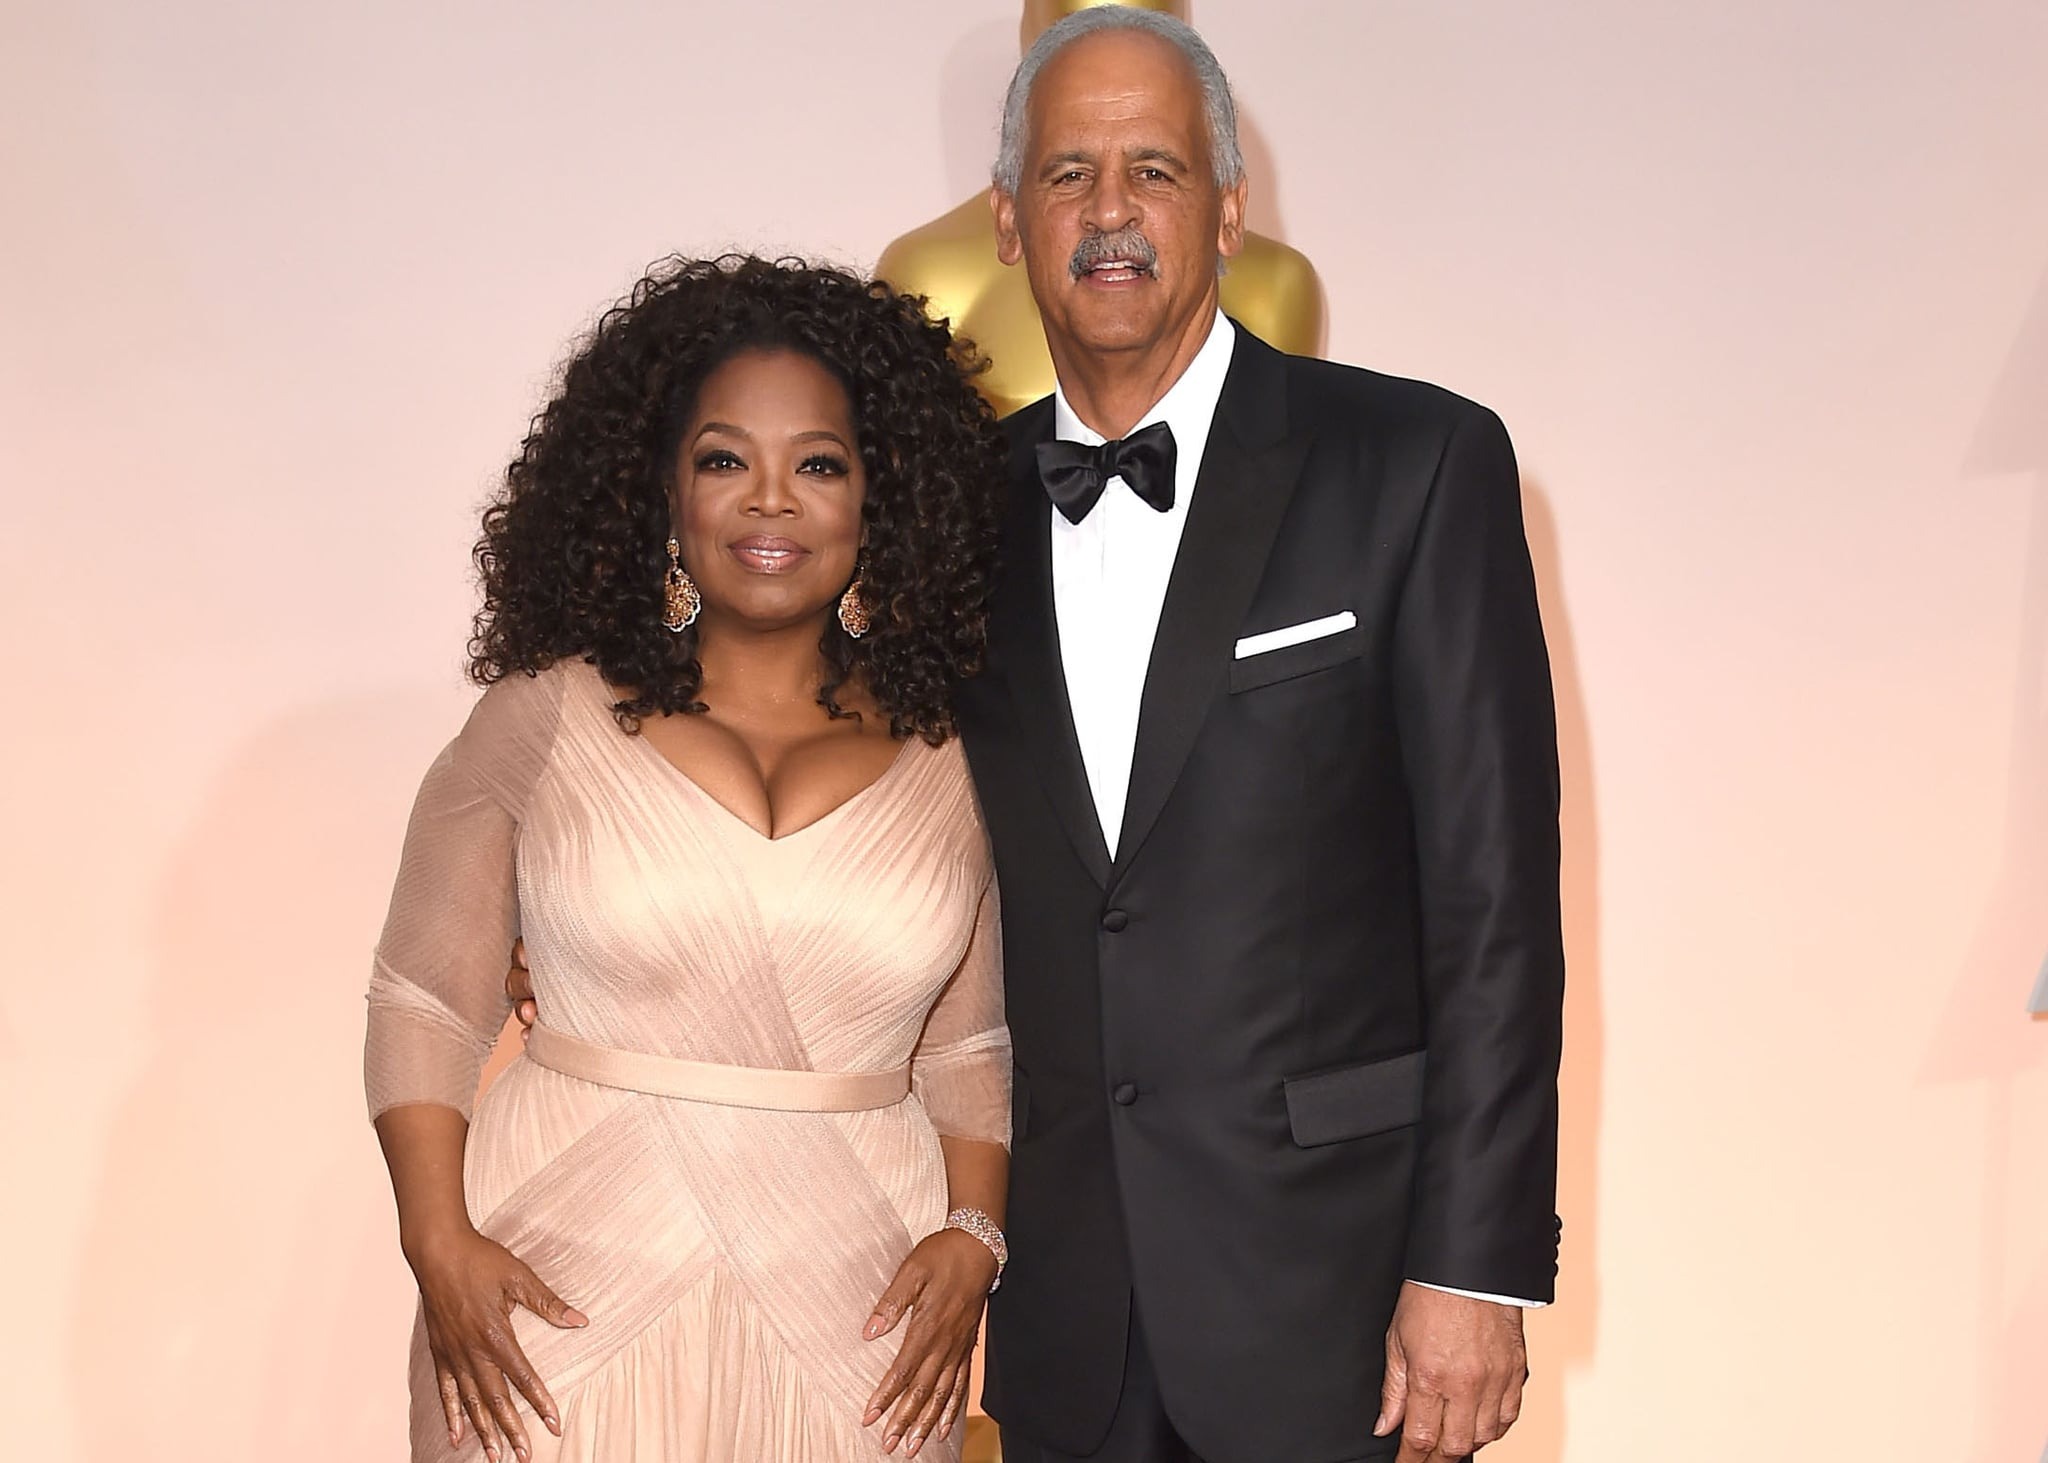 Oprah Winfrey Has Been Married To Her All Along